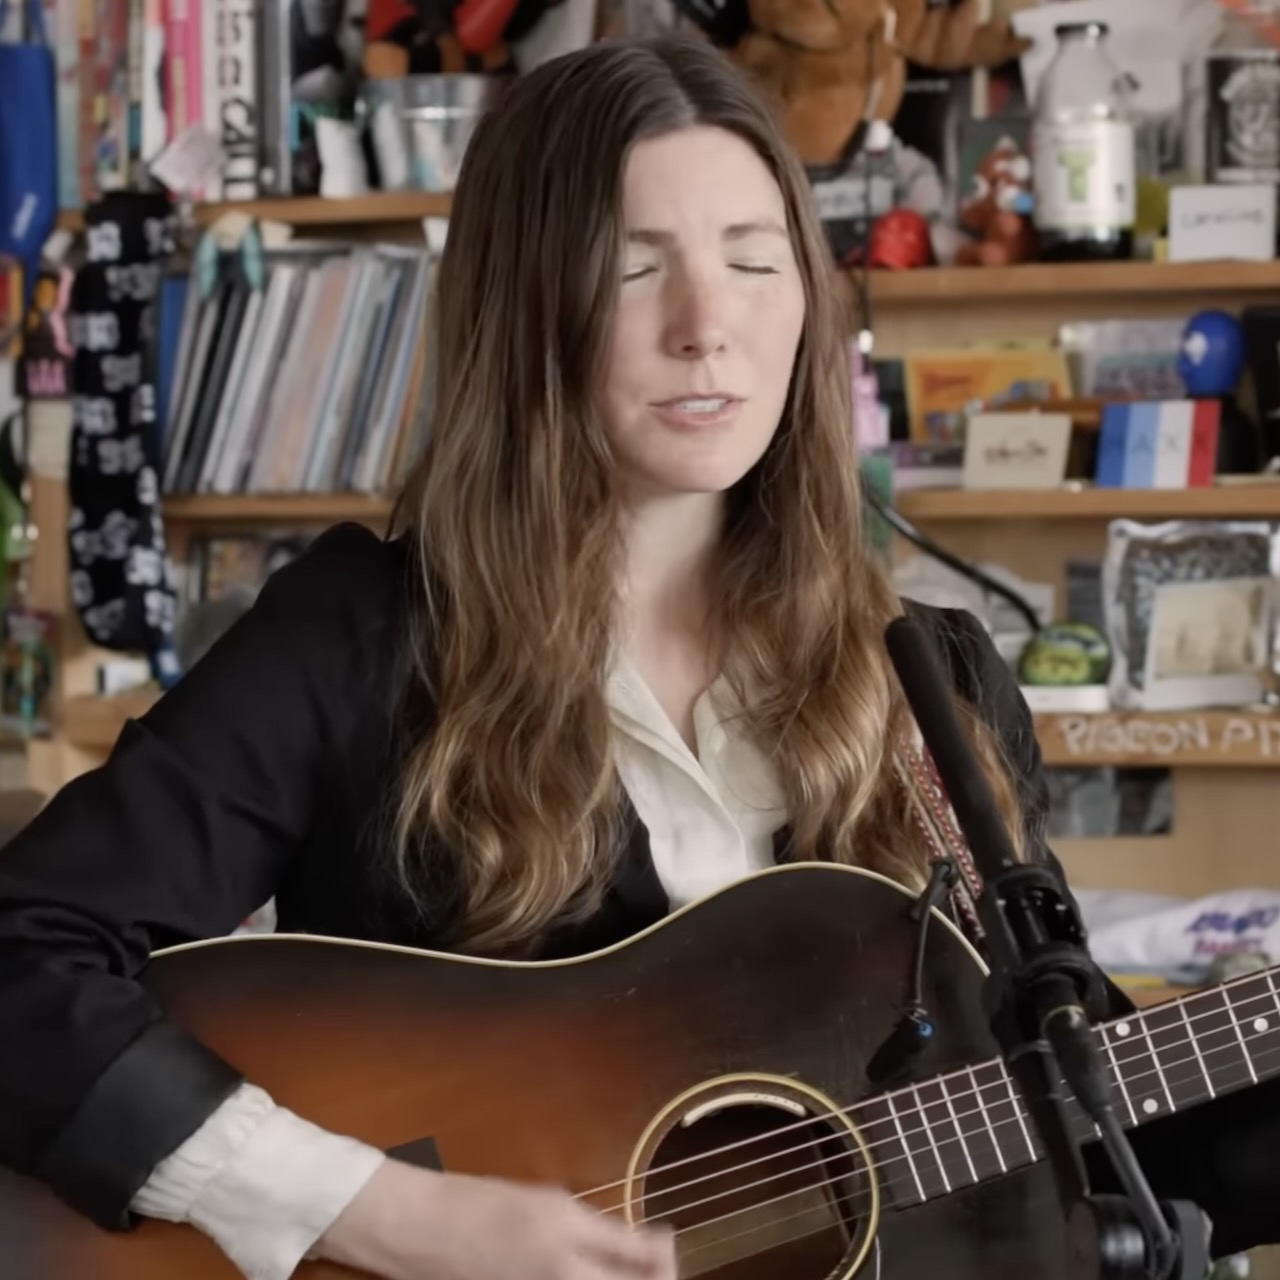 WATCH: Billy Strings and Sierra Hull Cover Post Malone's 